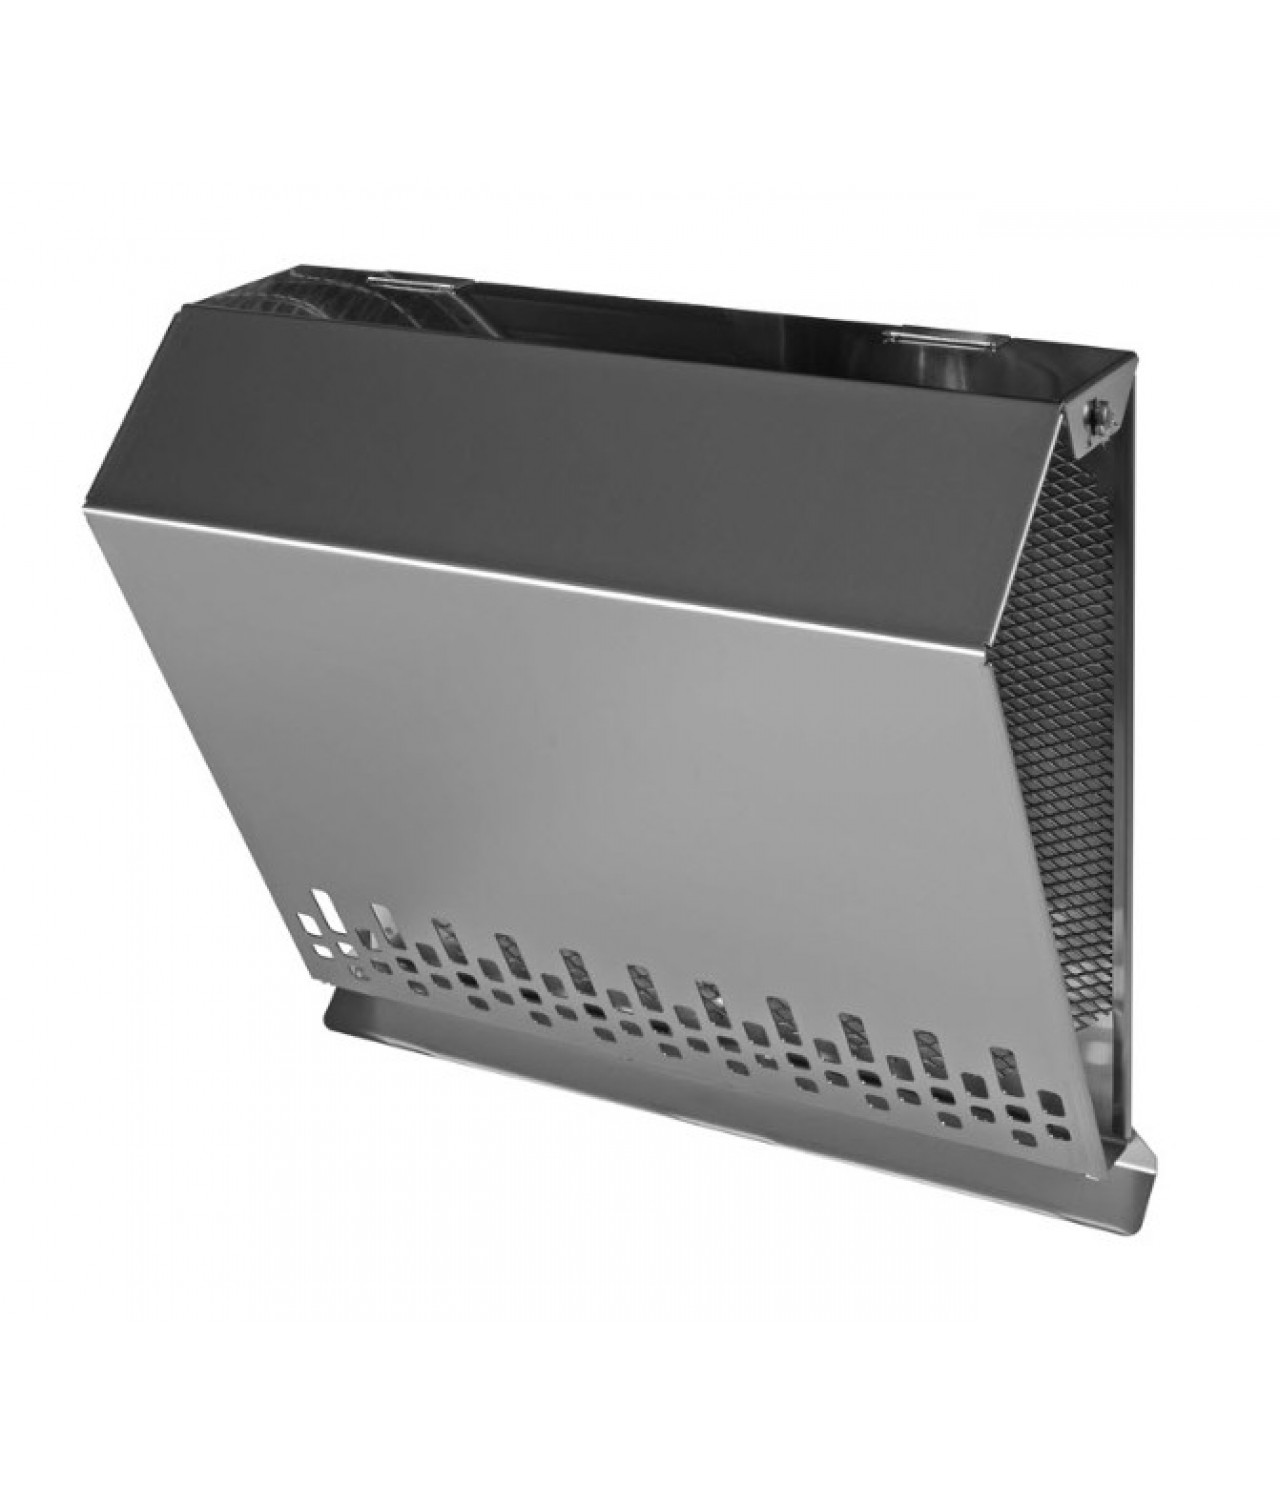 Decorative outdoor vents made of stainless steel DECO VCSM inox, for air supply